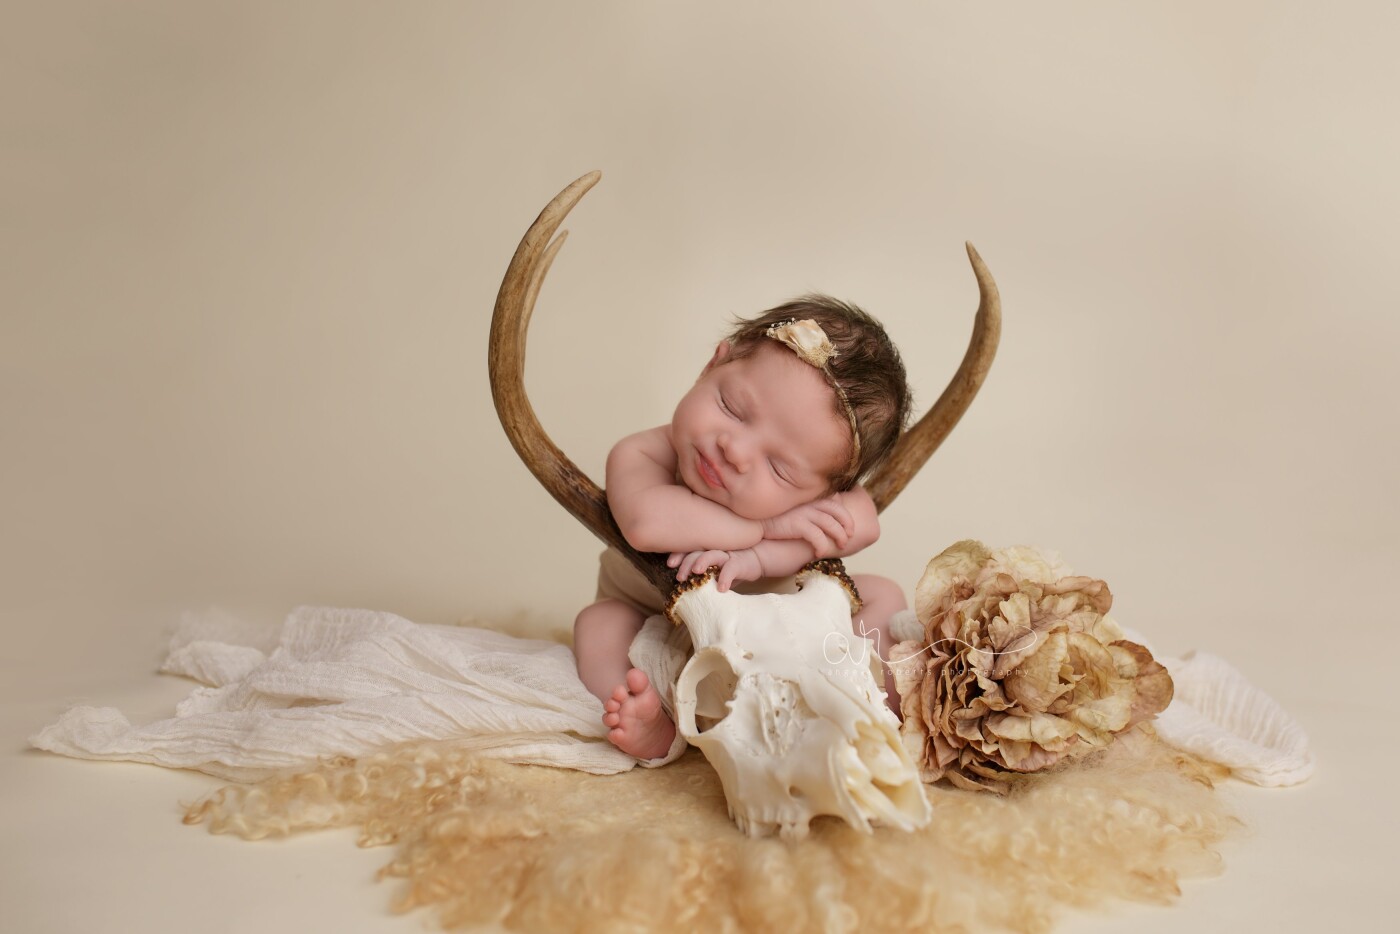 This little girl is dreaming of Daddy's buck, a special prop the parents brought to be incorporated into her newborn session. I love being able to customize sessions for parents.